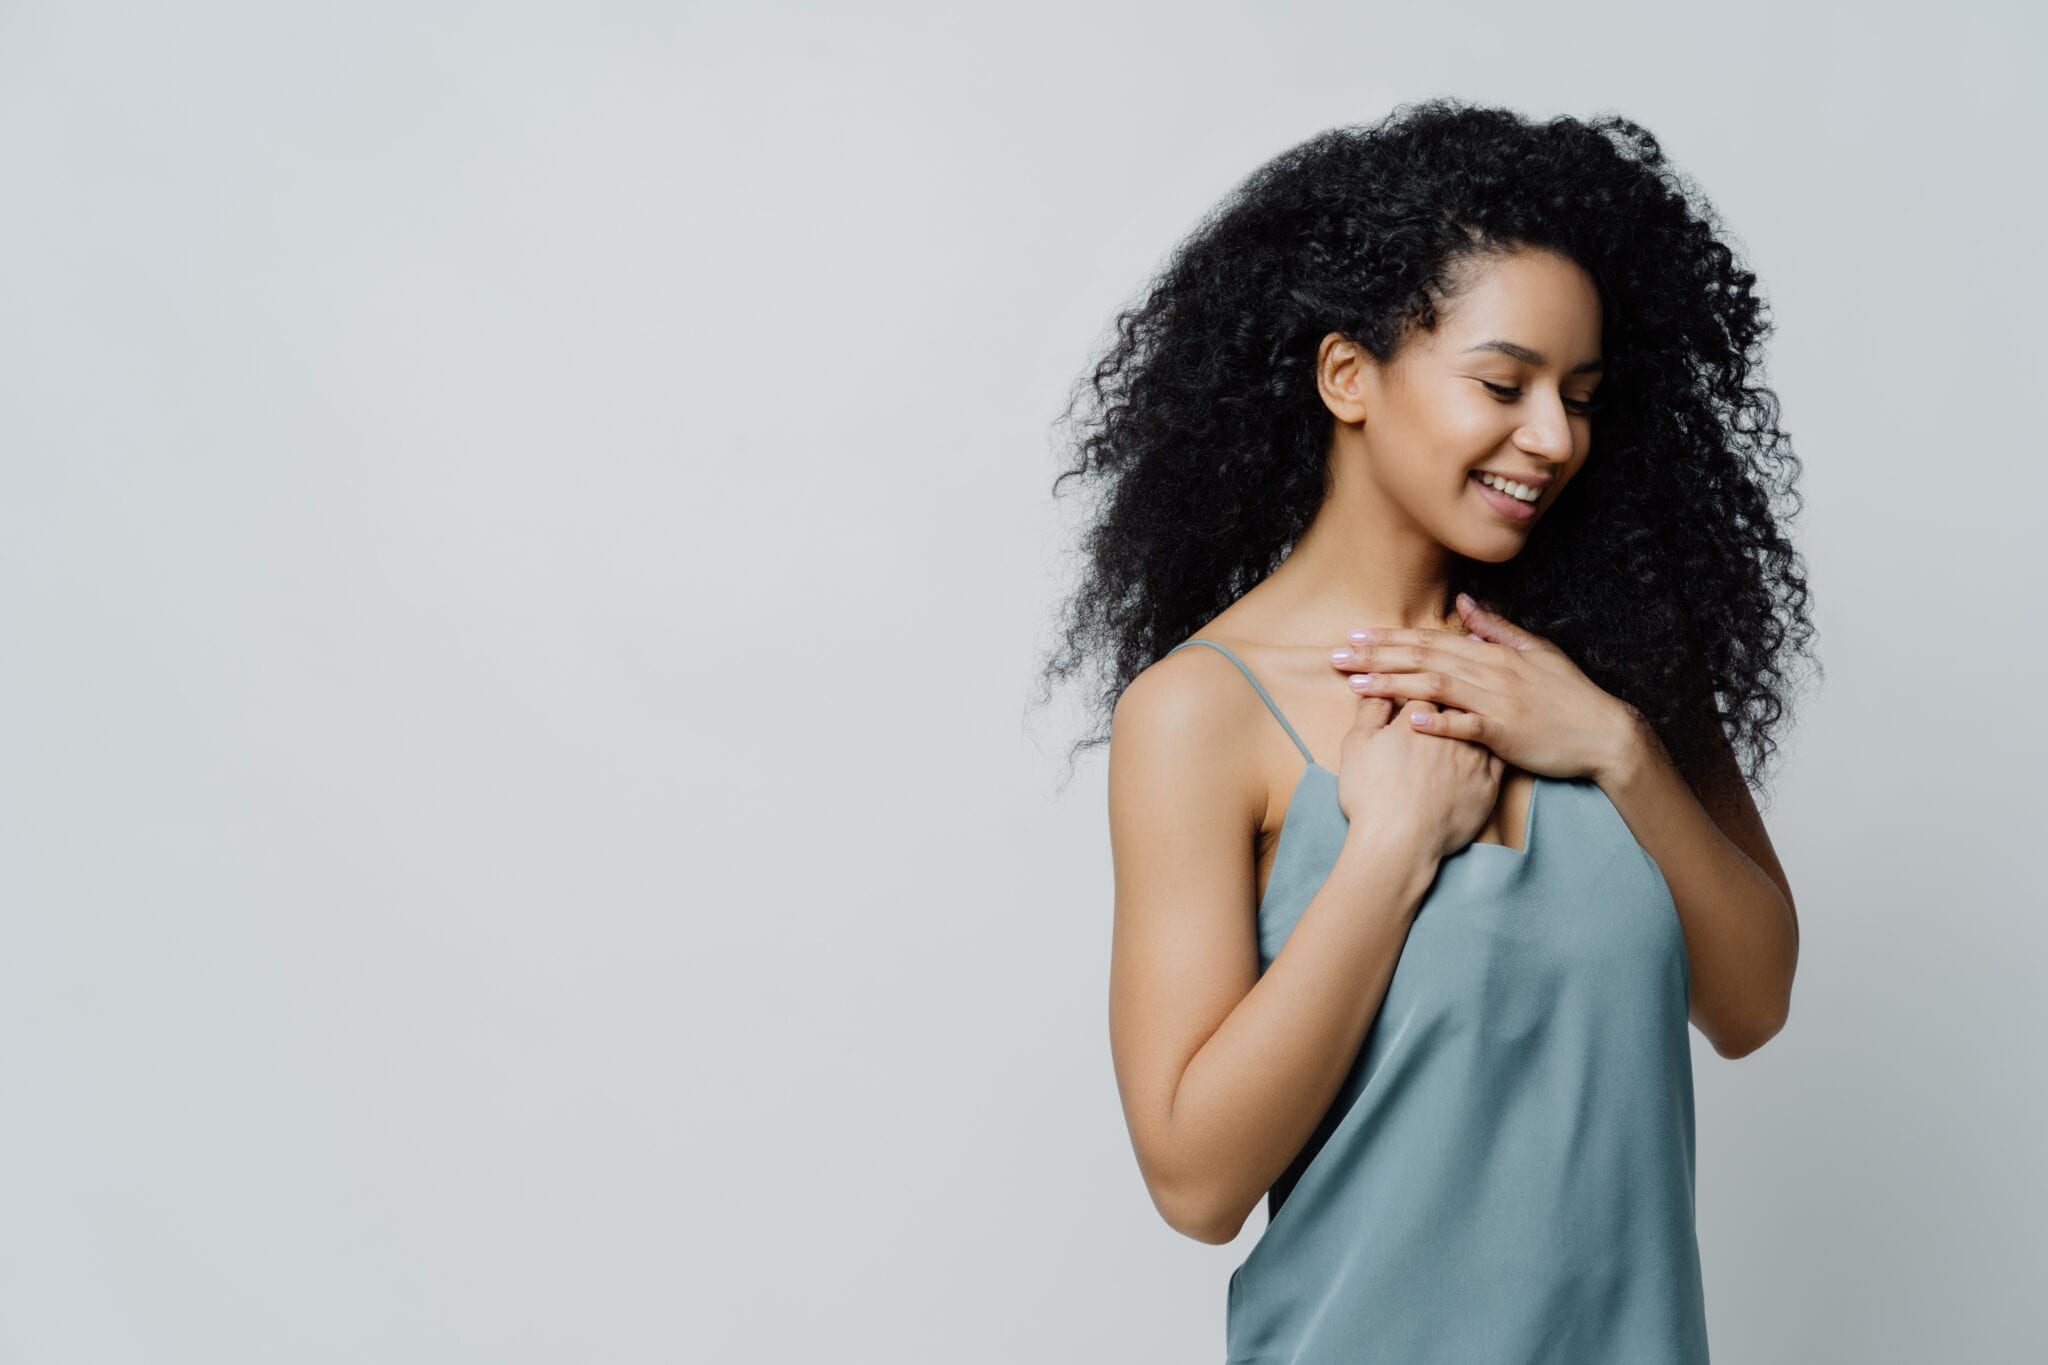 Profile Of Dreamy Romantic Ethnic Woman With Afro Haircut, Dressed In Nightwear, Keeps Hands On Chest, Recalls Very Pleasant Moment In Life Smiles Tenderly With Closes Eyes Expresses Truthful Feelings